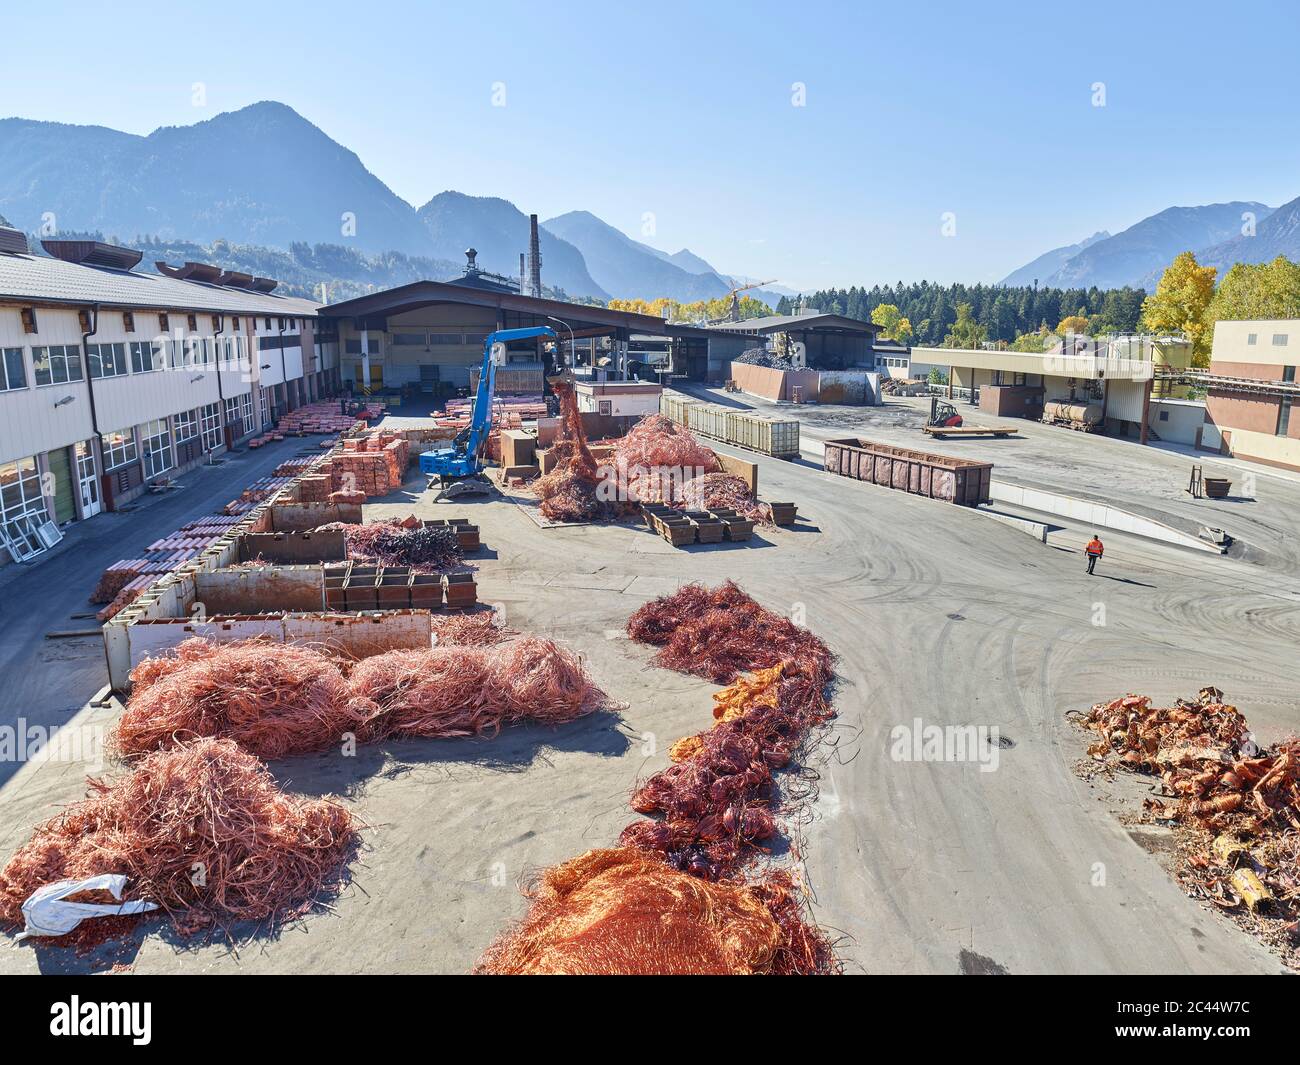 Austria, Tyrol, Brixlegg, Electronic copper wires being recycled in junkyard Stock Photo